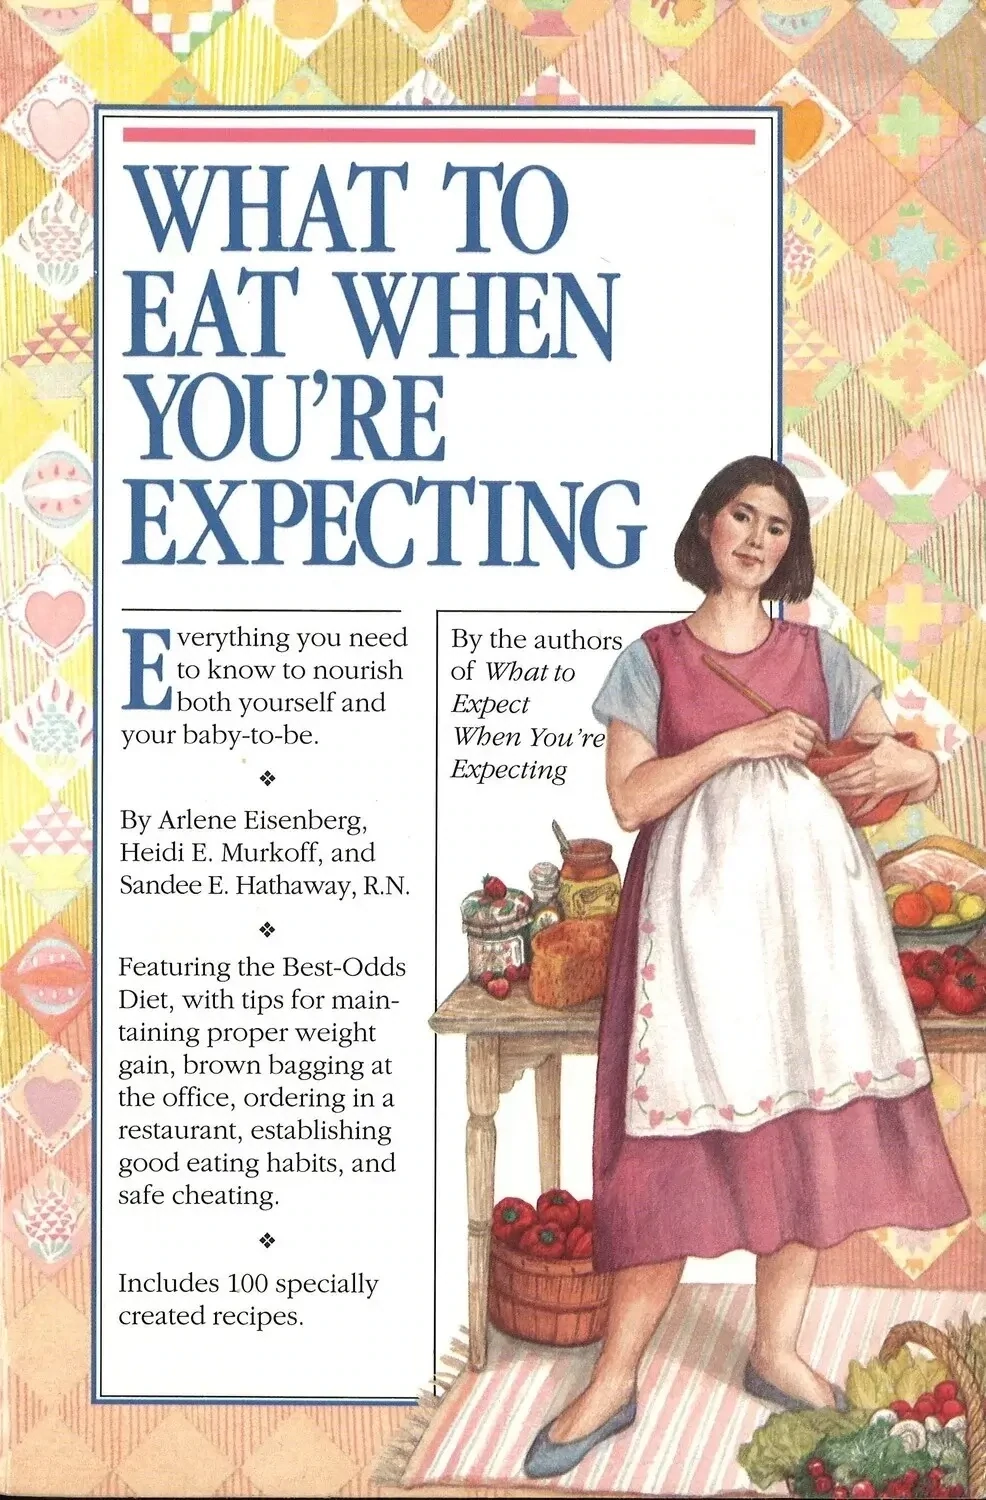 What to Eat When You're Expecting by Arlene Eisenberg,